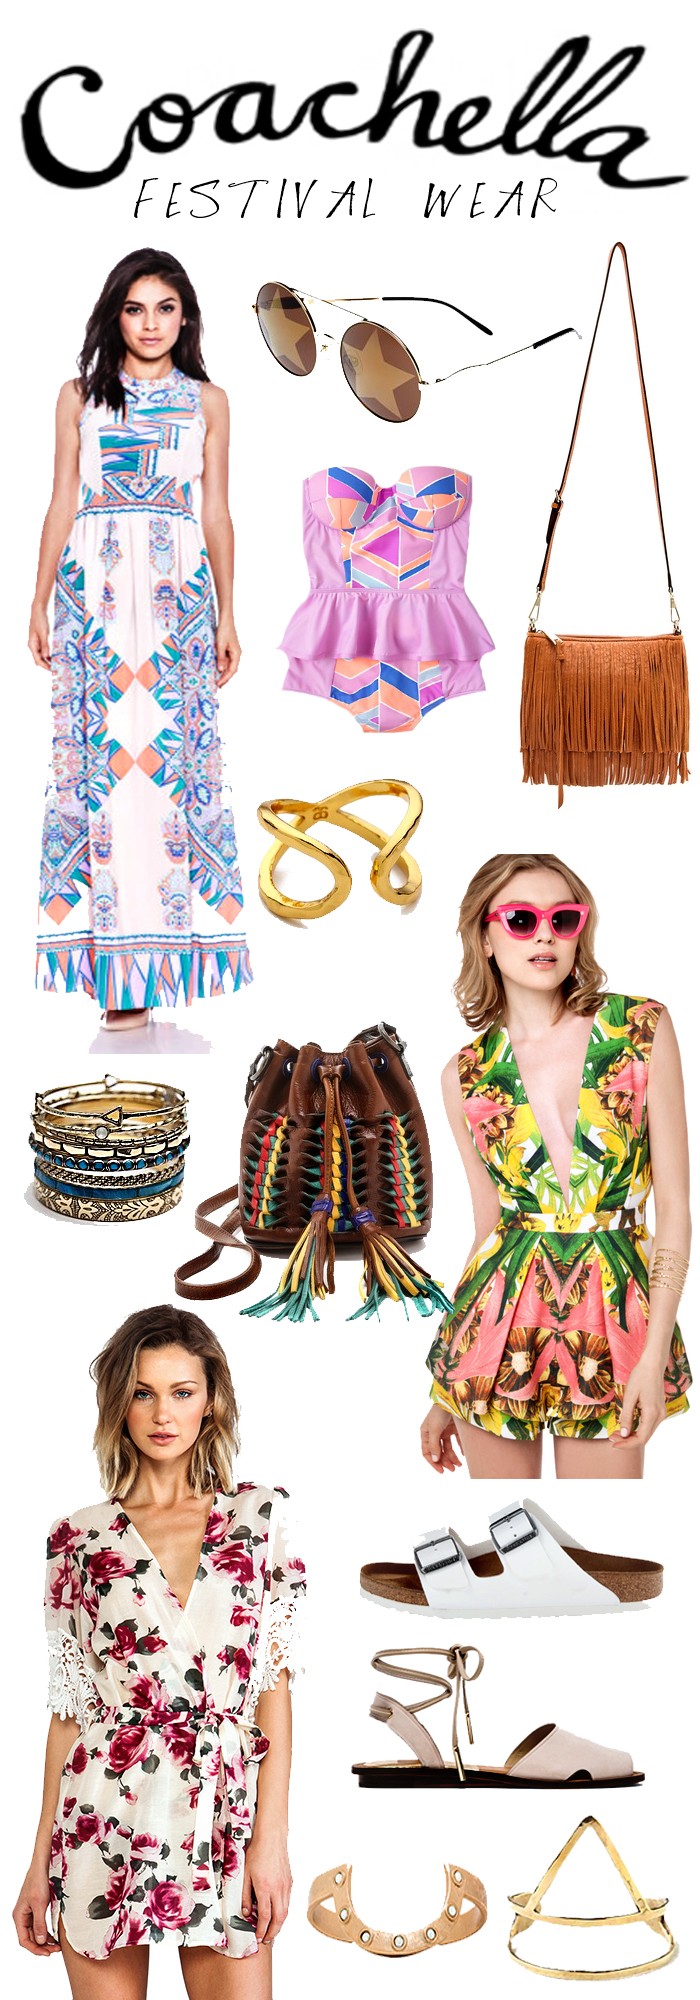 Darling Desires, Coachella, What to wear to coachella, coachella lineup, coachella 2014, zimmermann, free people, arm cuff, bracelet, cuff, birkenstock, zappos, cameo the label, cameo, stackable rings, ring stack, stack of rings, rings, maxi dress, summer, spring, zinke, fringe, rebecca minkoff, rebecca minkoff fringe, gorjana griffin, frye rastafarian, rasta, bucket bag, robe, Caitlin Lindquist, A Little Dash of Darling, Dash of Darling, fashion blog, fashion blogger, beauty blog, fashion collage, personal style blog, 